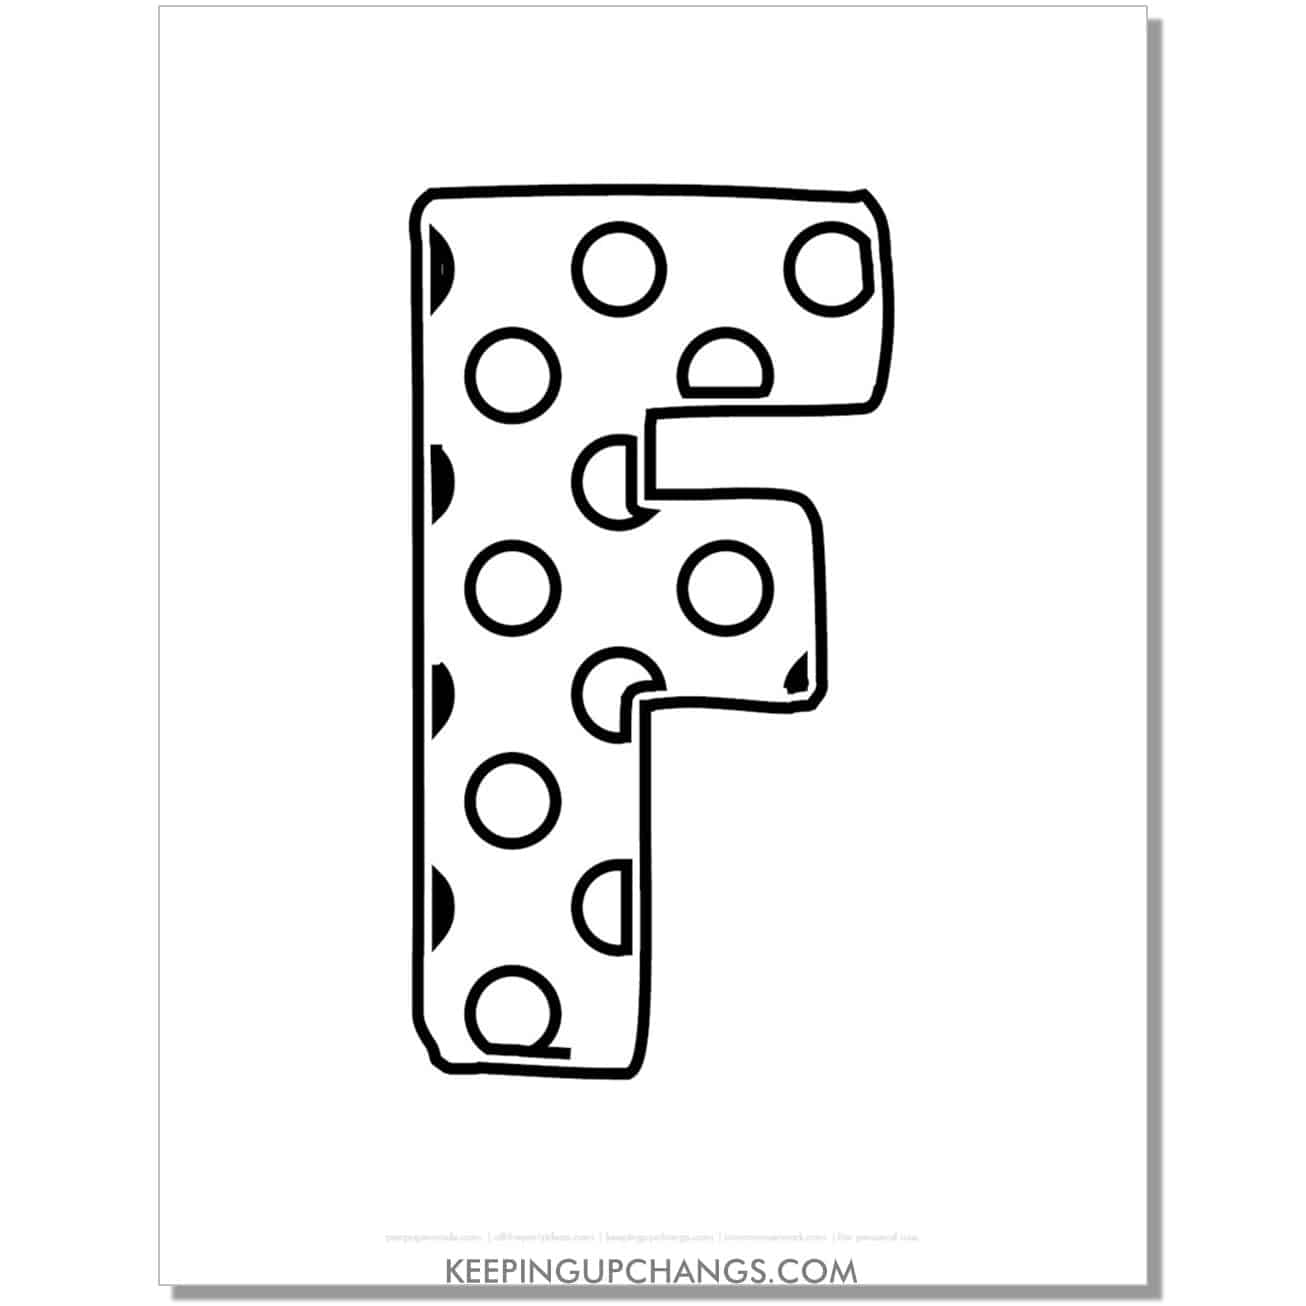 free alphabet letter f coloring page with polka dots for toddlers, preschool, kindergarten.